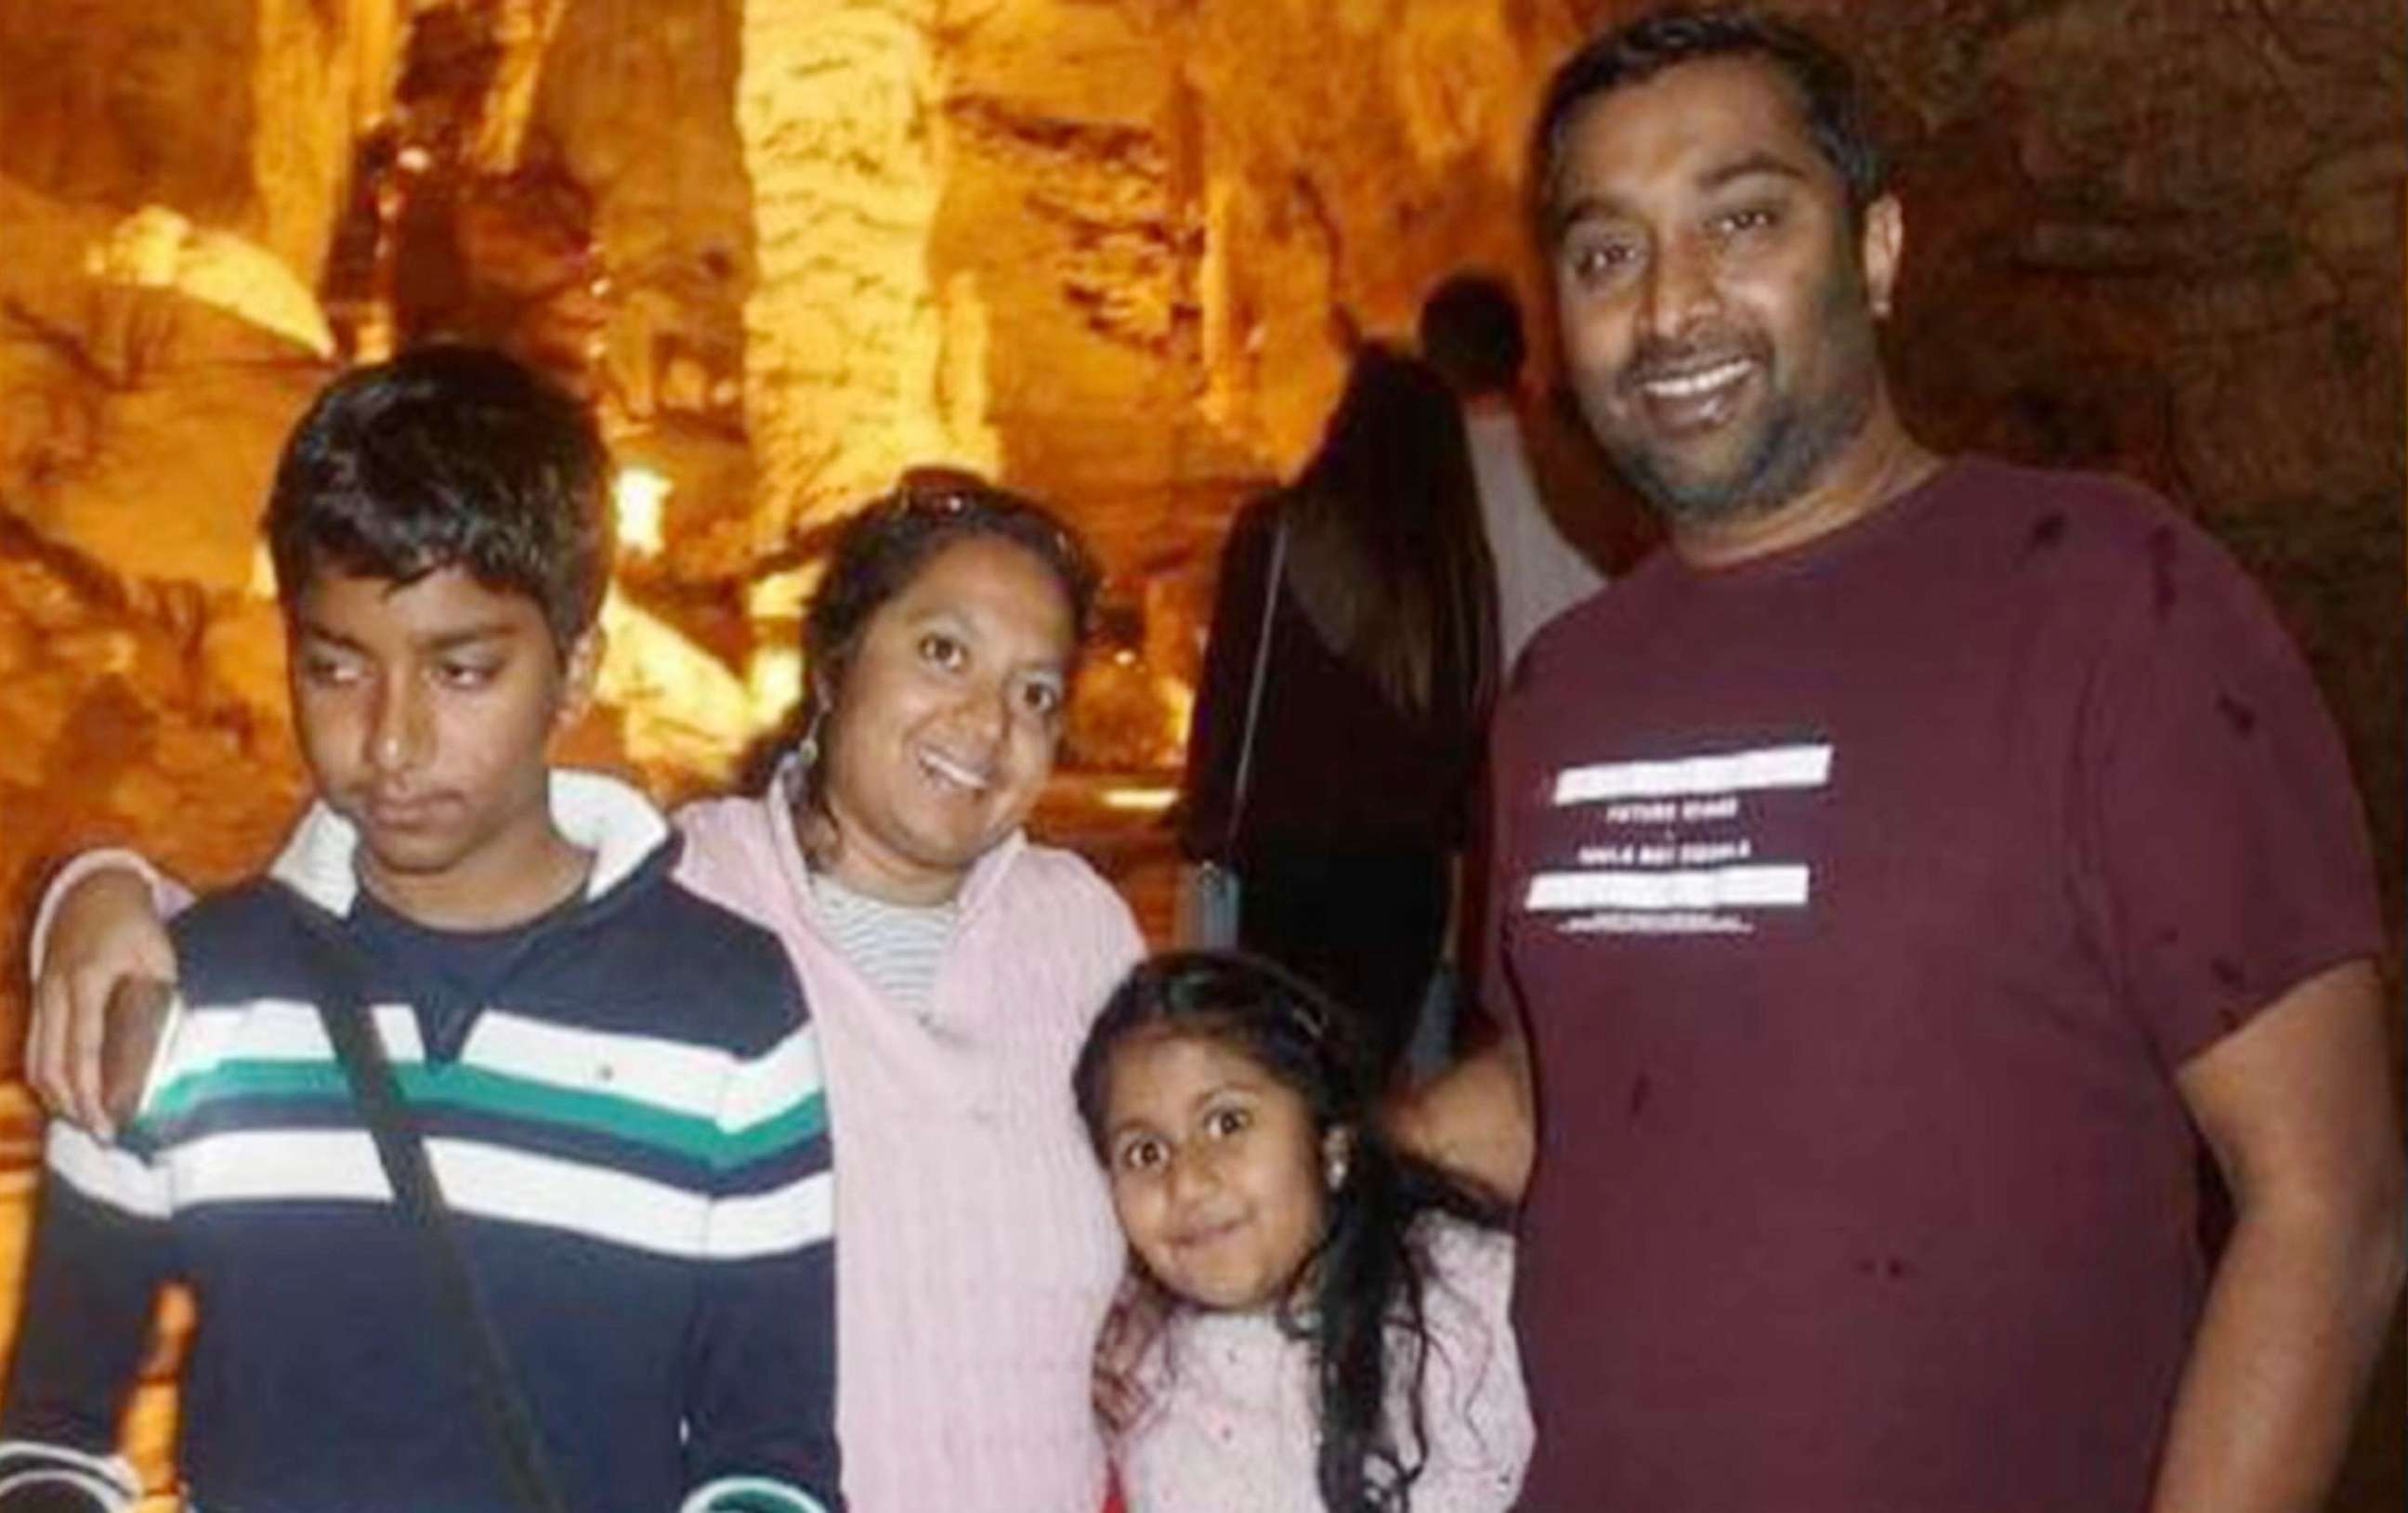 PHOTO: The Thottapilly family from Santa Clarita, Calif., is missing.